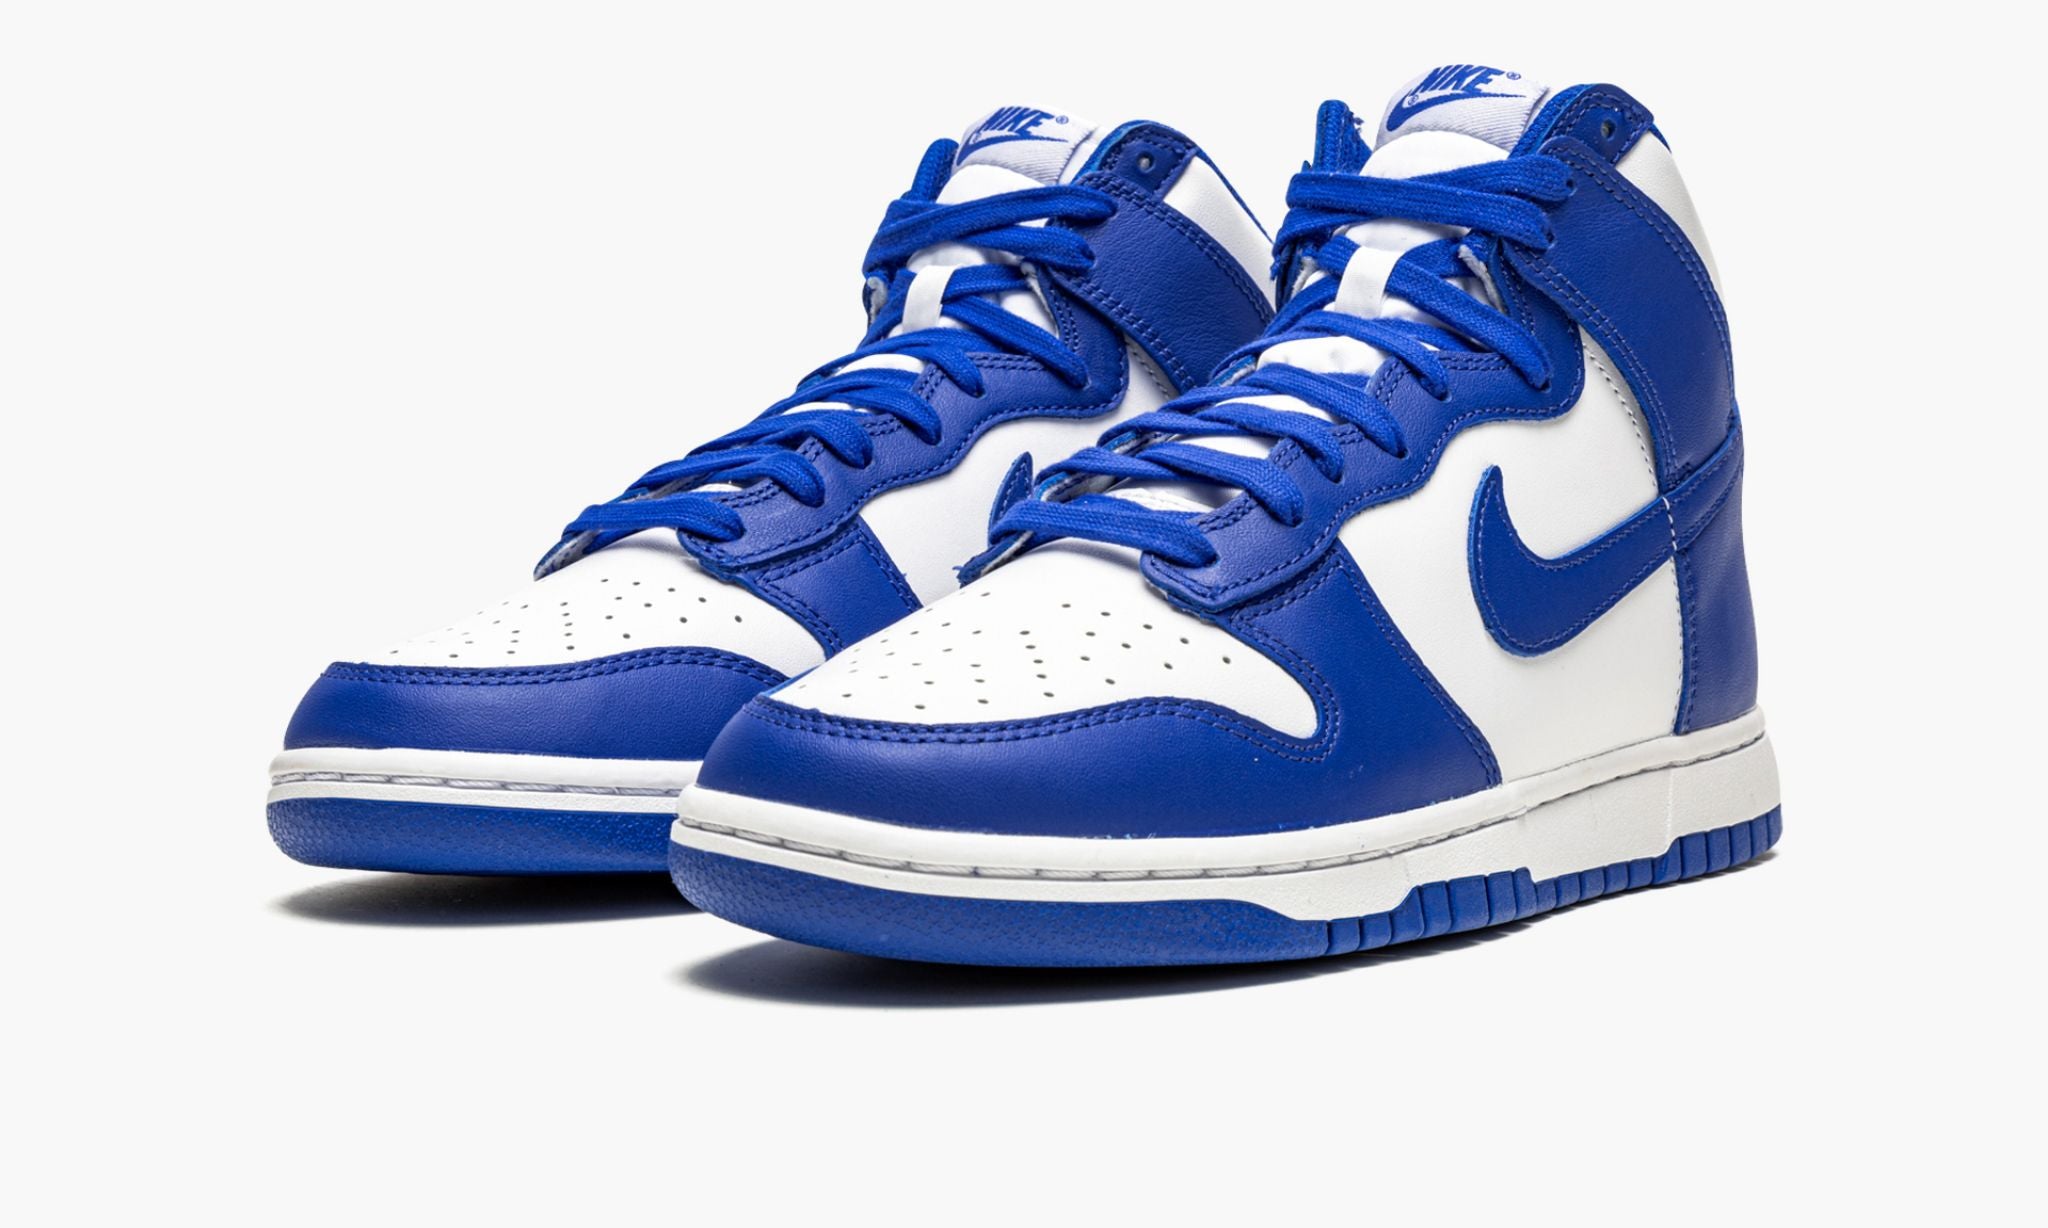 Nike Dunk High Game Royal | The Sneaker Store